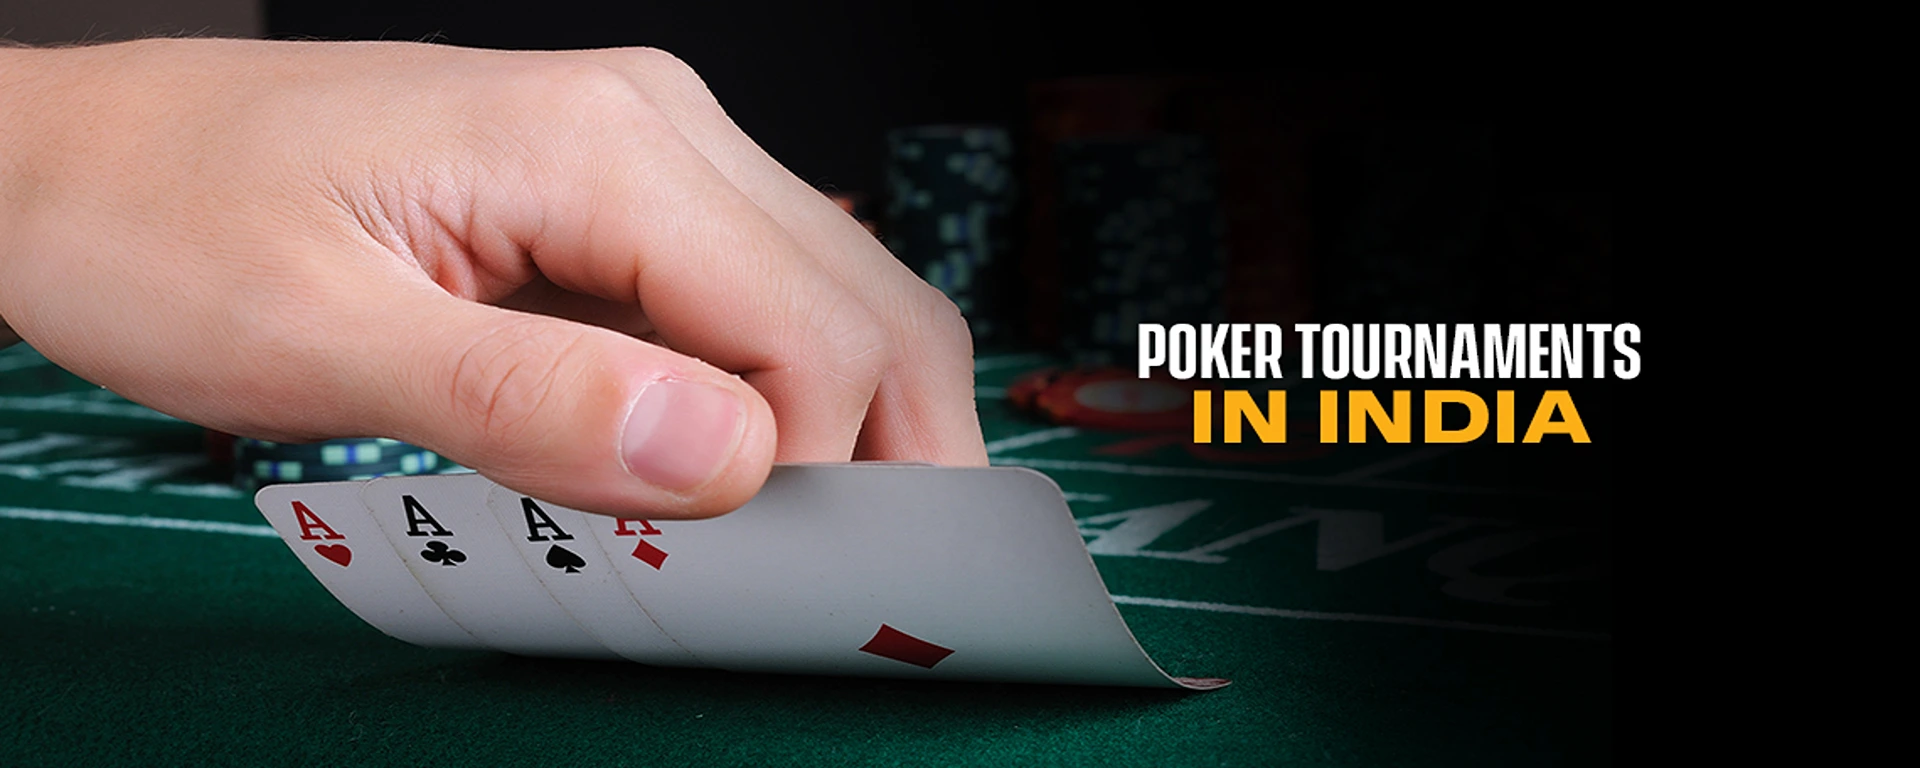 Poker Tournaments In India